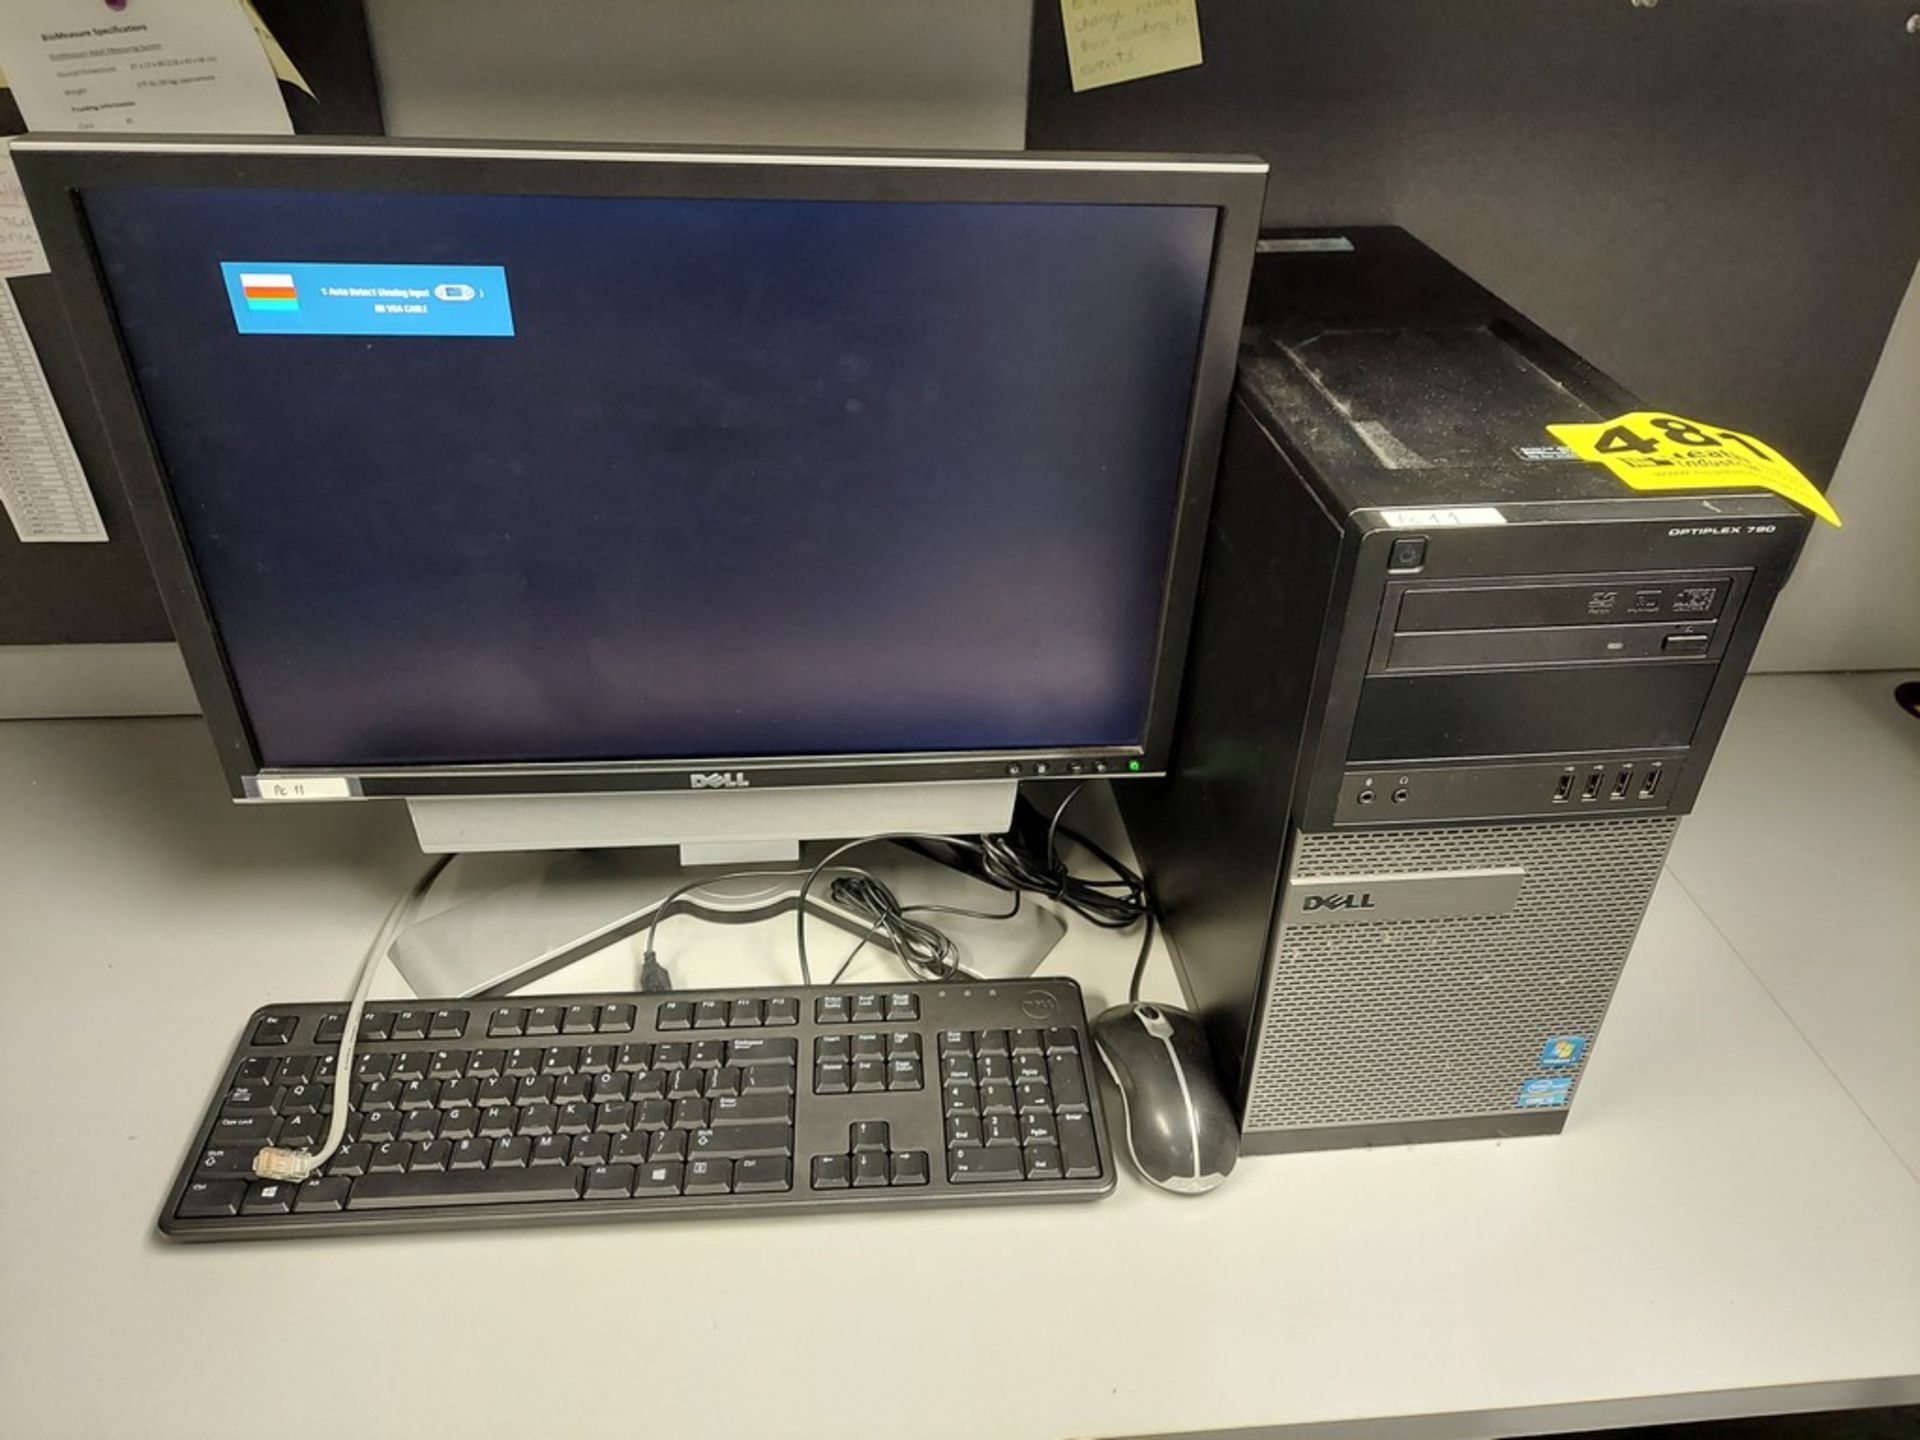 DELL OPTIPLEX 790 INTEL I5 CORE DESKTOP COMPUTER WITH FLATSCREEN MONITOR, KEYBOARD AND MOUSE